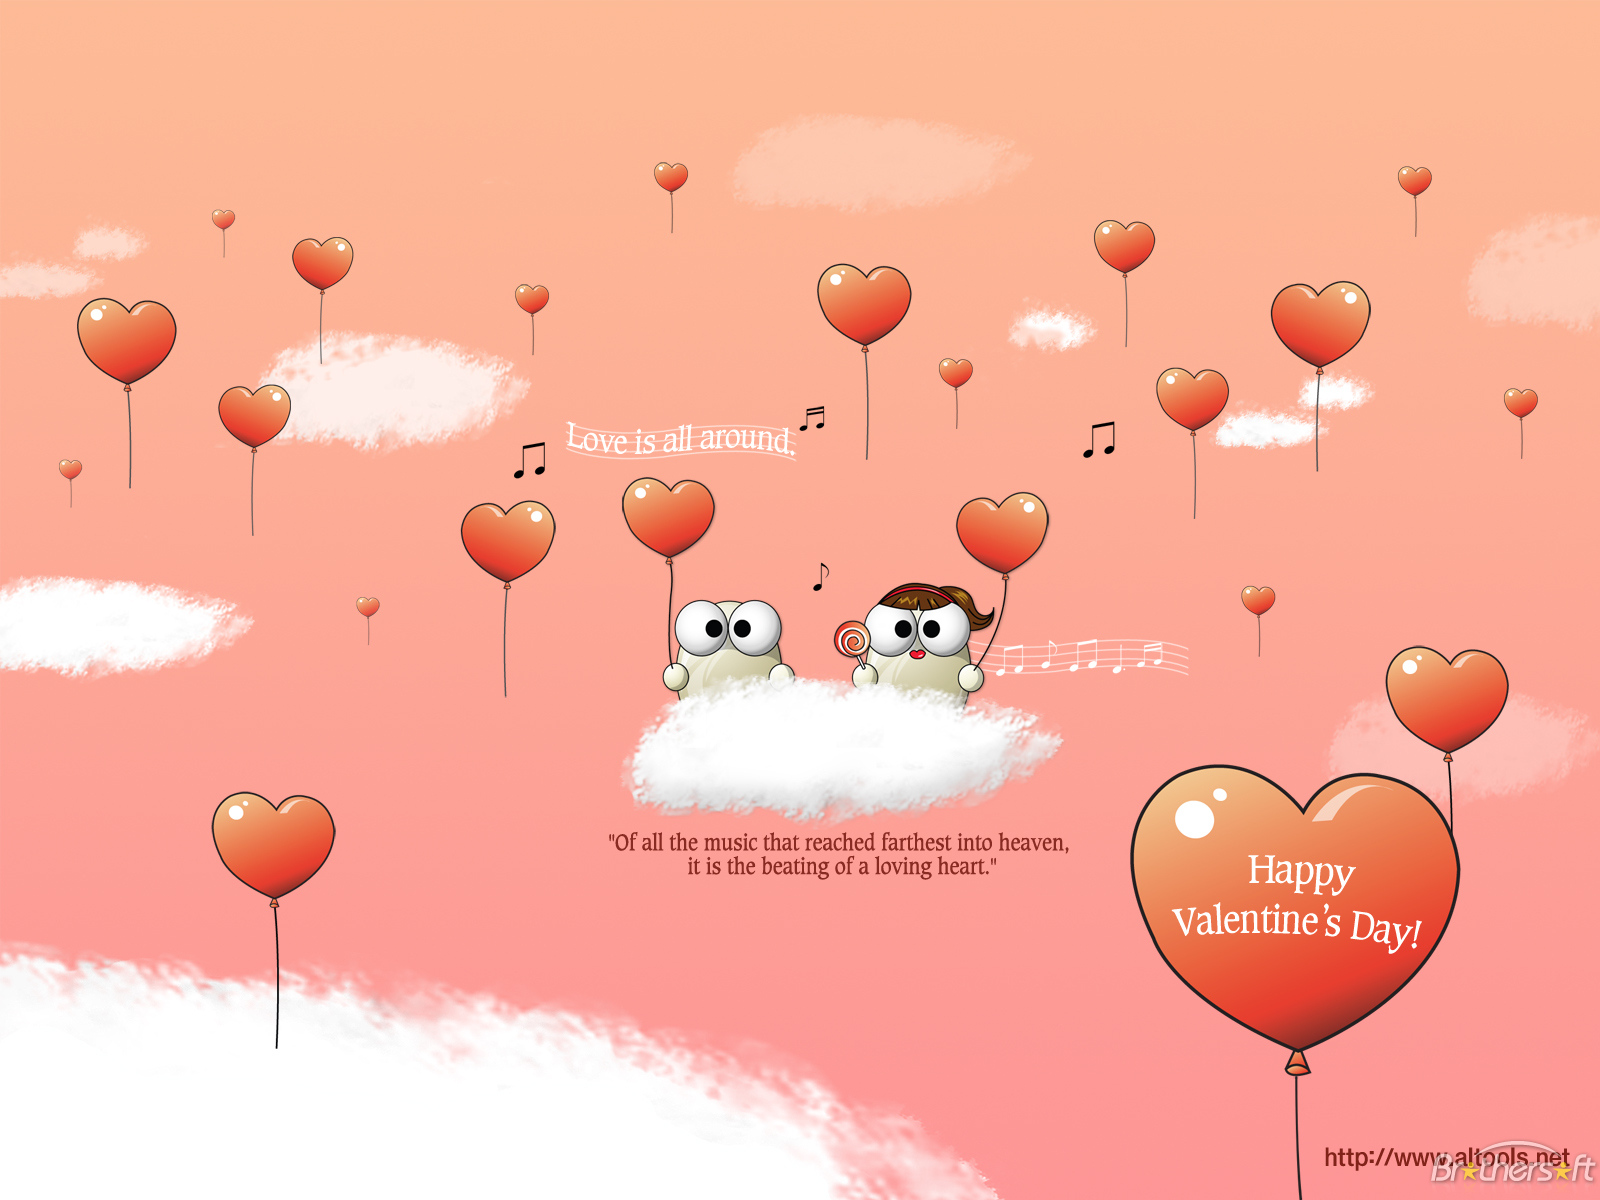 Funny Valentines Day Backgrounds - 1600x1200 Wallpaper 